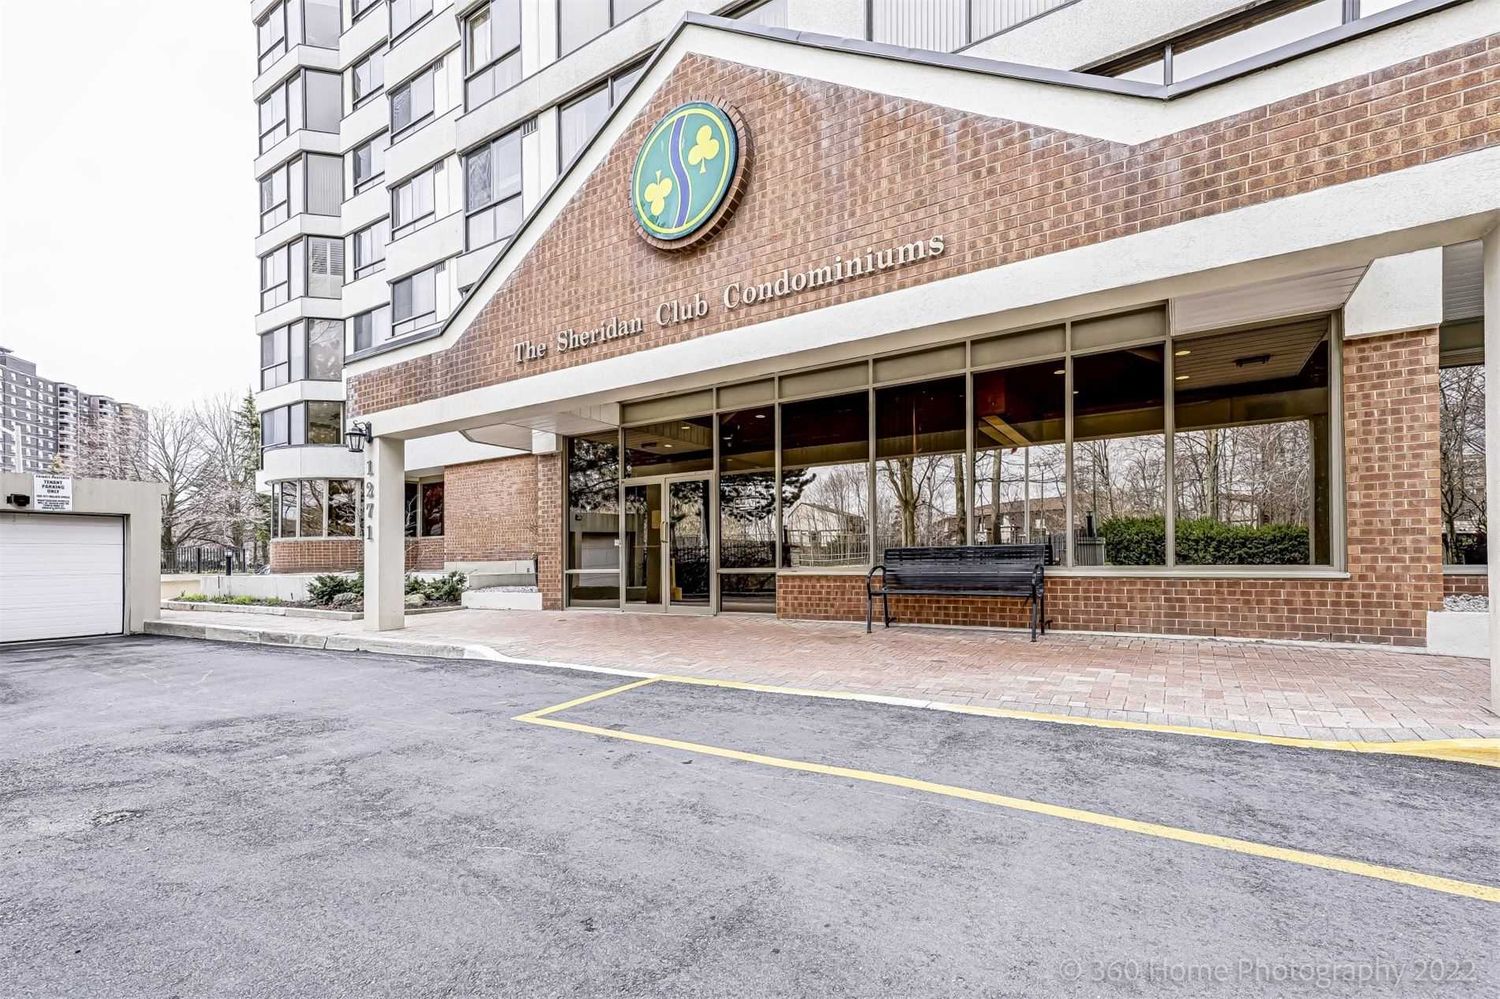 1271 Walden Cir. Sheridan Club Condos is located in  Mississauga, Toronto - image #2 of 3